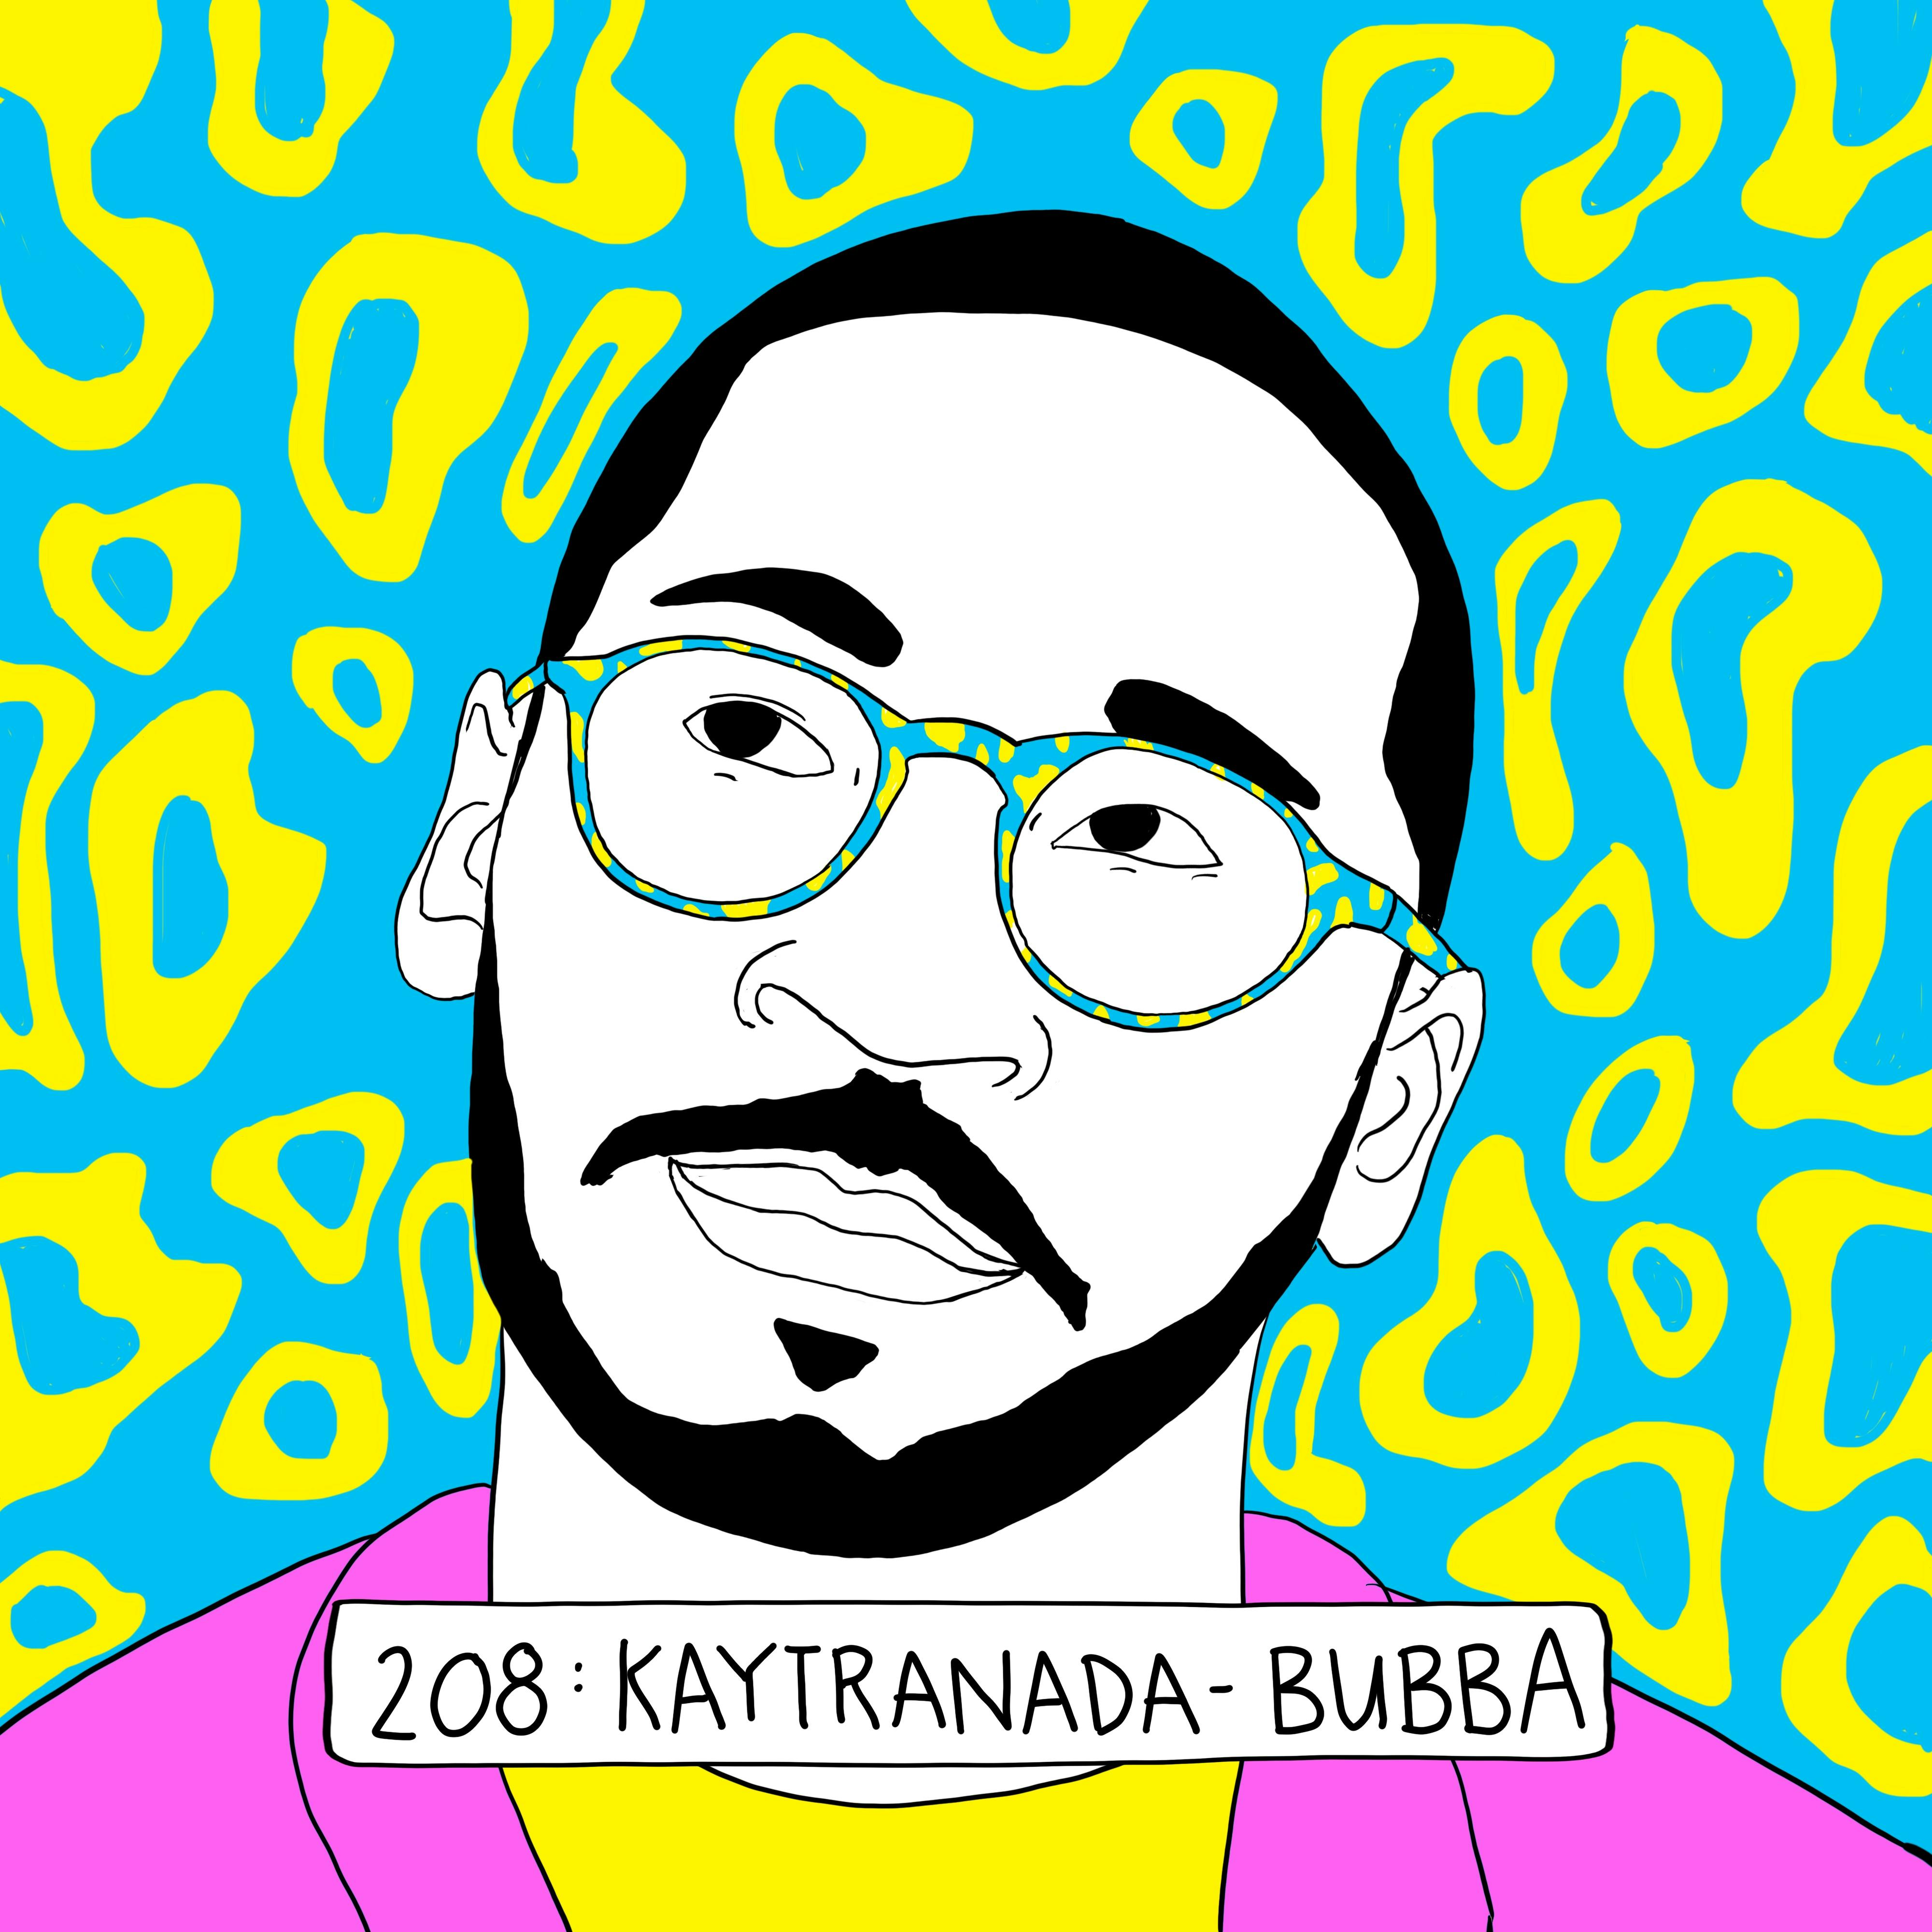 Kaytranada’s journey from basement beat-making to the Grammys